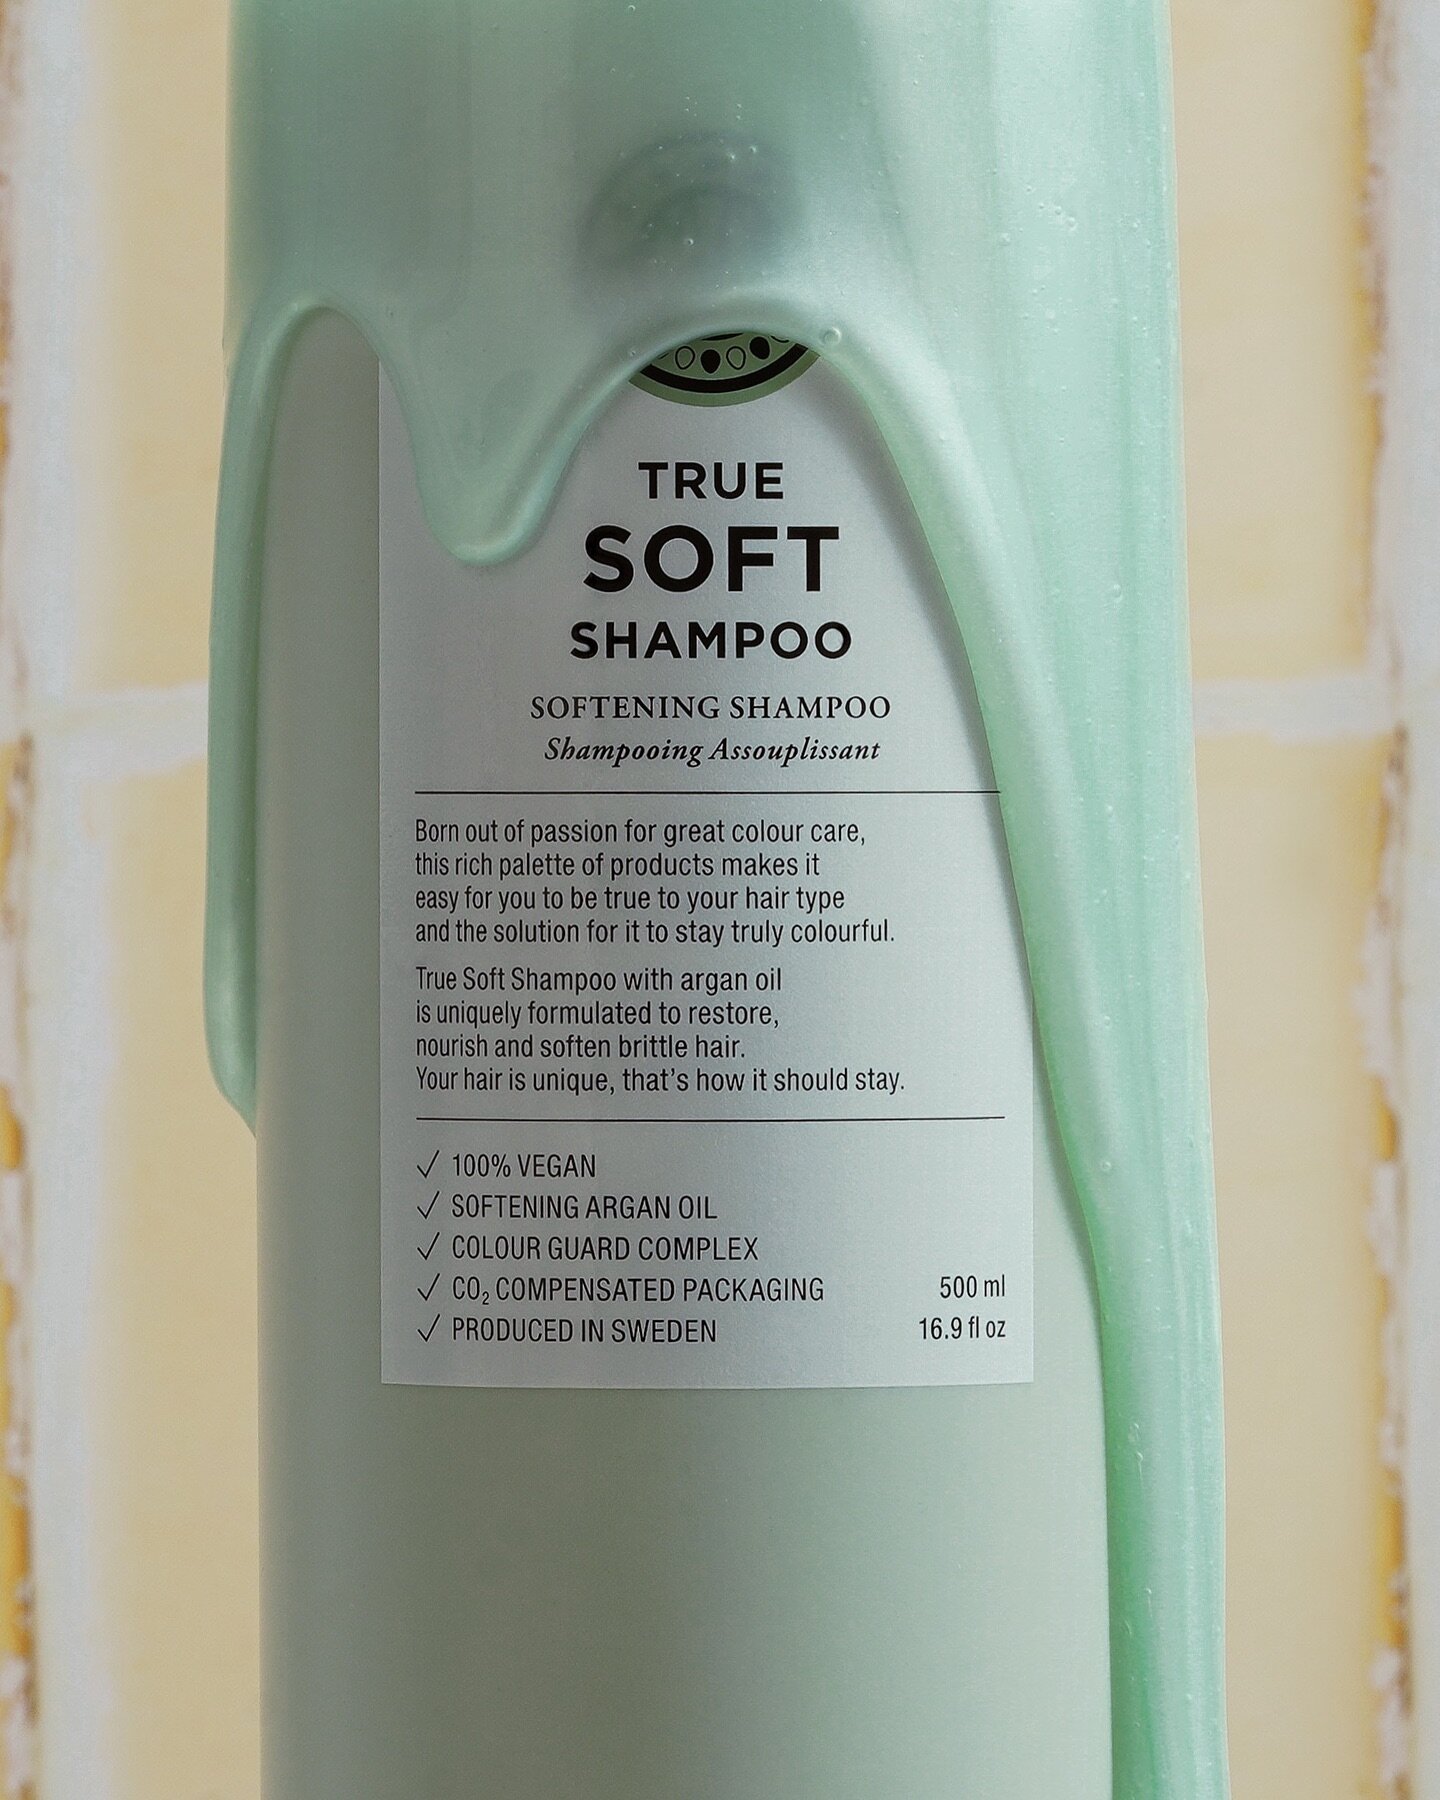 She&rsquo;s soft 🧼 
In frame: @marianilastockholm True Soft Shampoo

&bull; Contains smoothing argan oil, antioxidants and fatty acids
&bull; A fresh floral scent of lily, jasmine, and rose.
&bull; Perfect for dry hair
&bull; Strengthens and reduce 